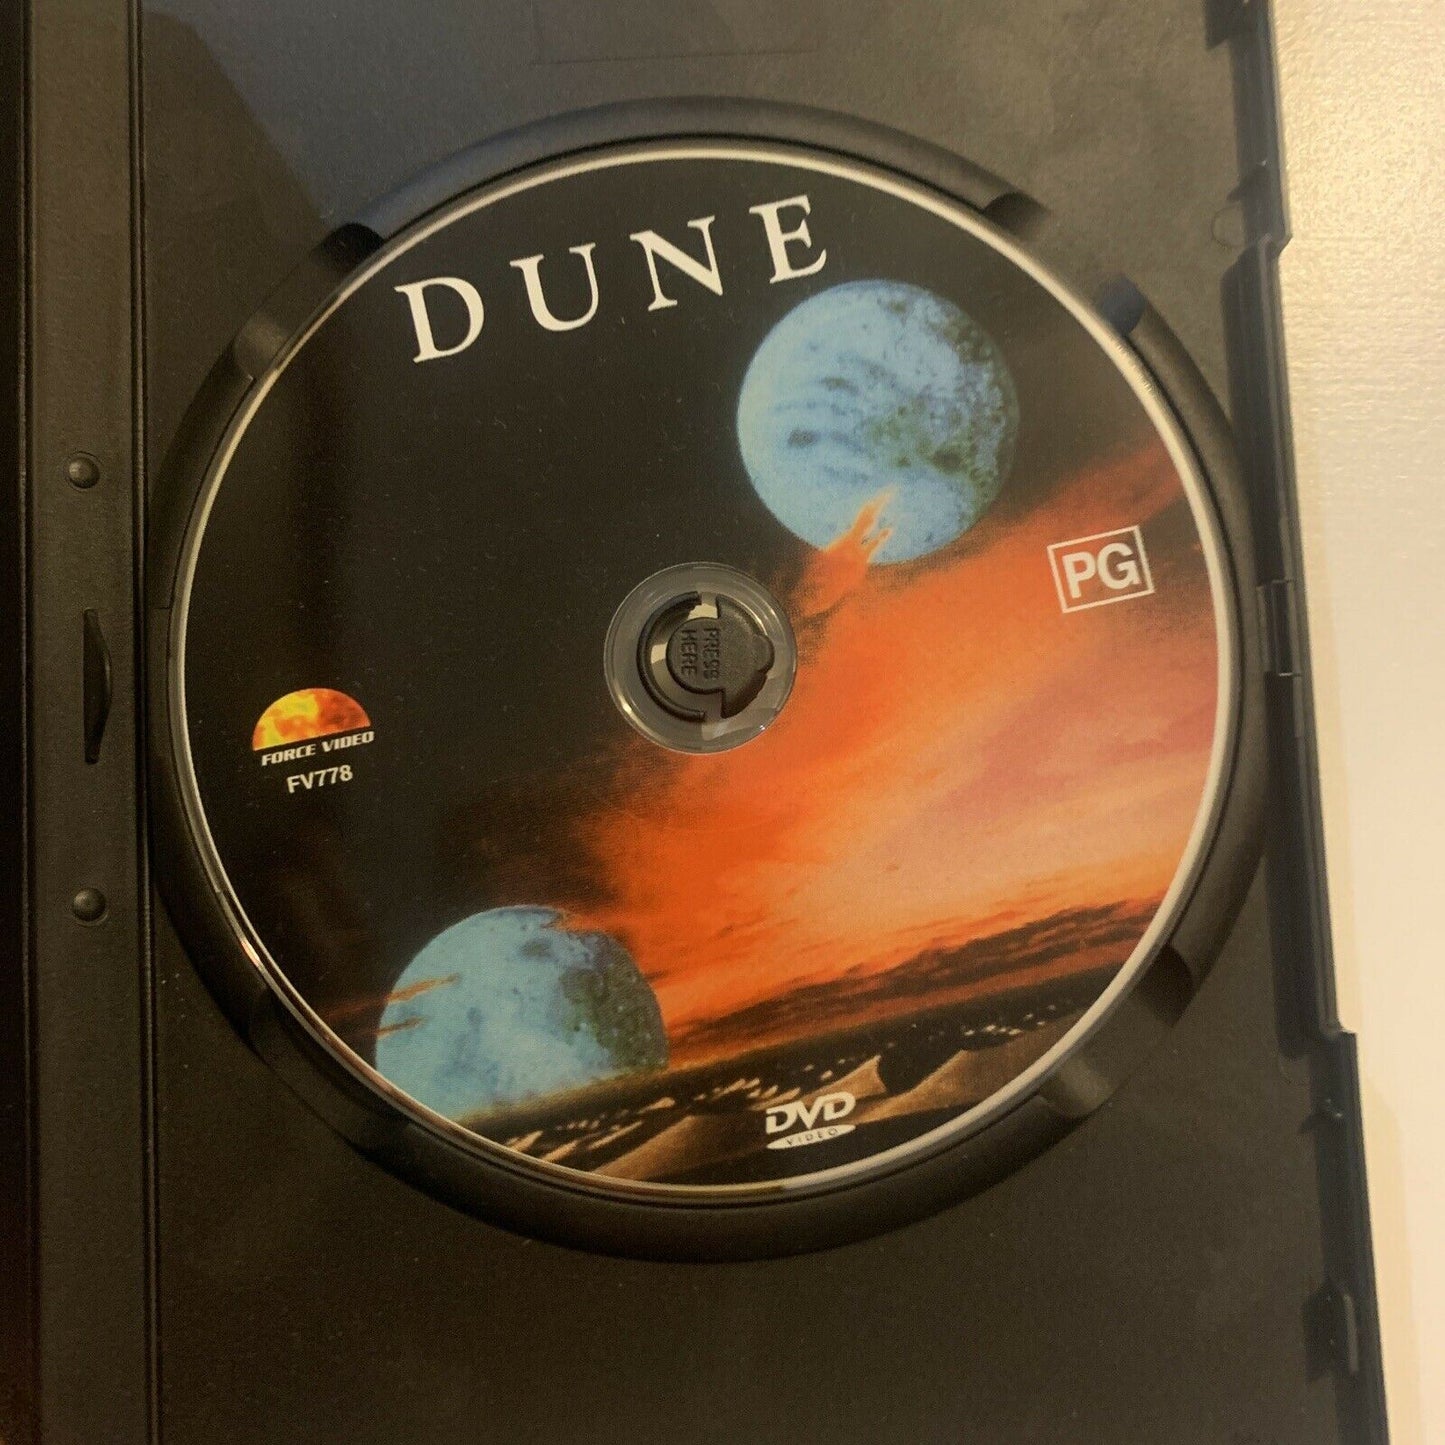 Dune - 3 Hour Extended Edition (DVD, 1984) Kyle MacLachlan, Sting